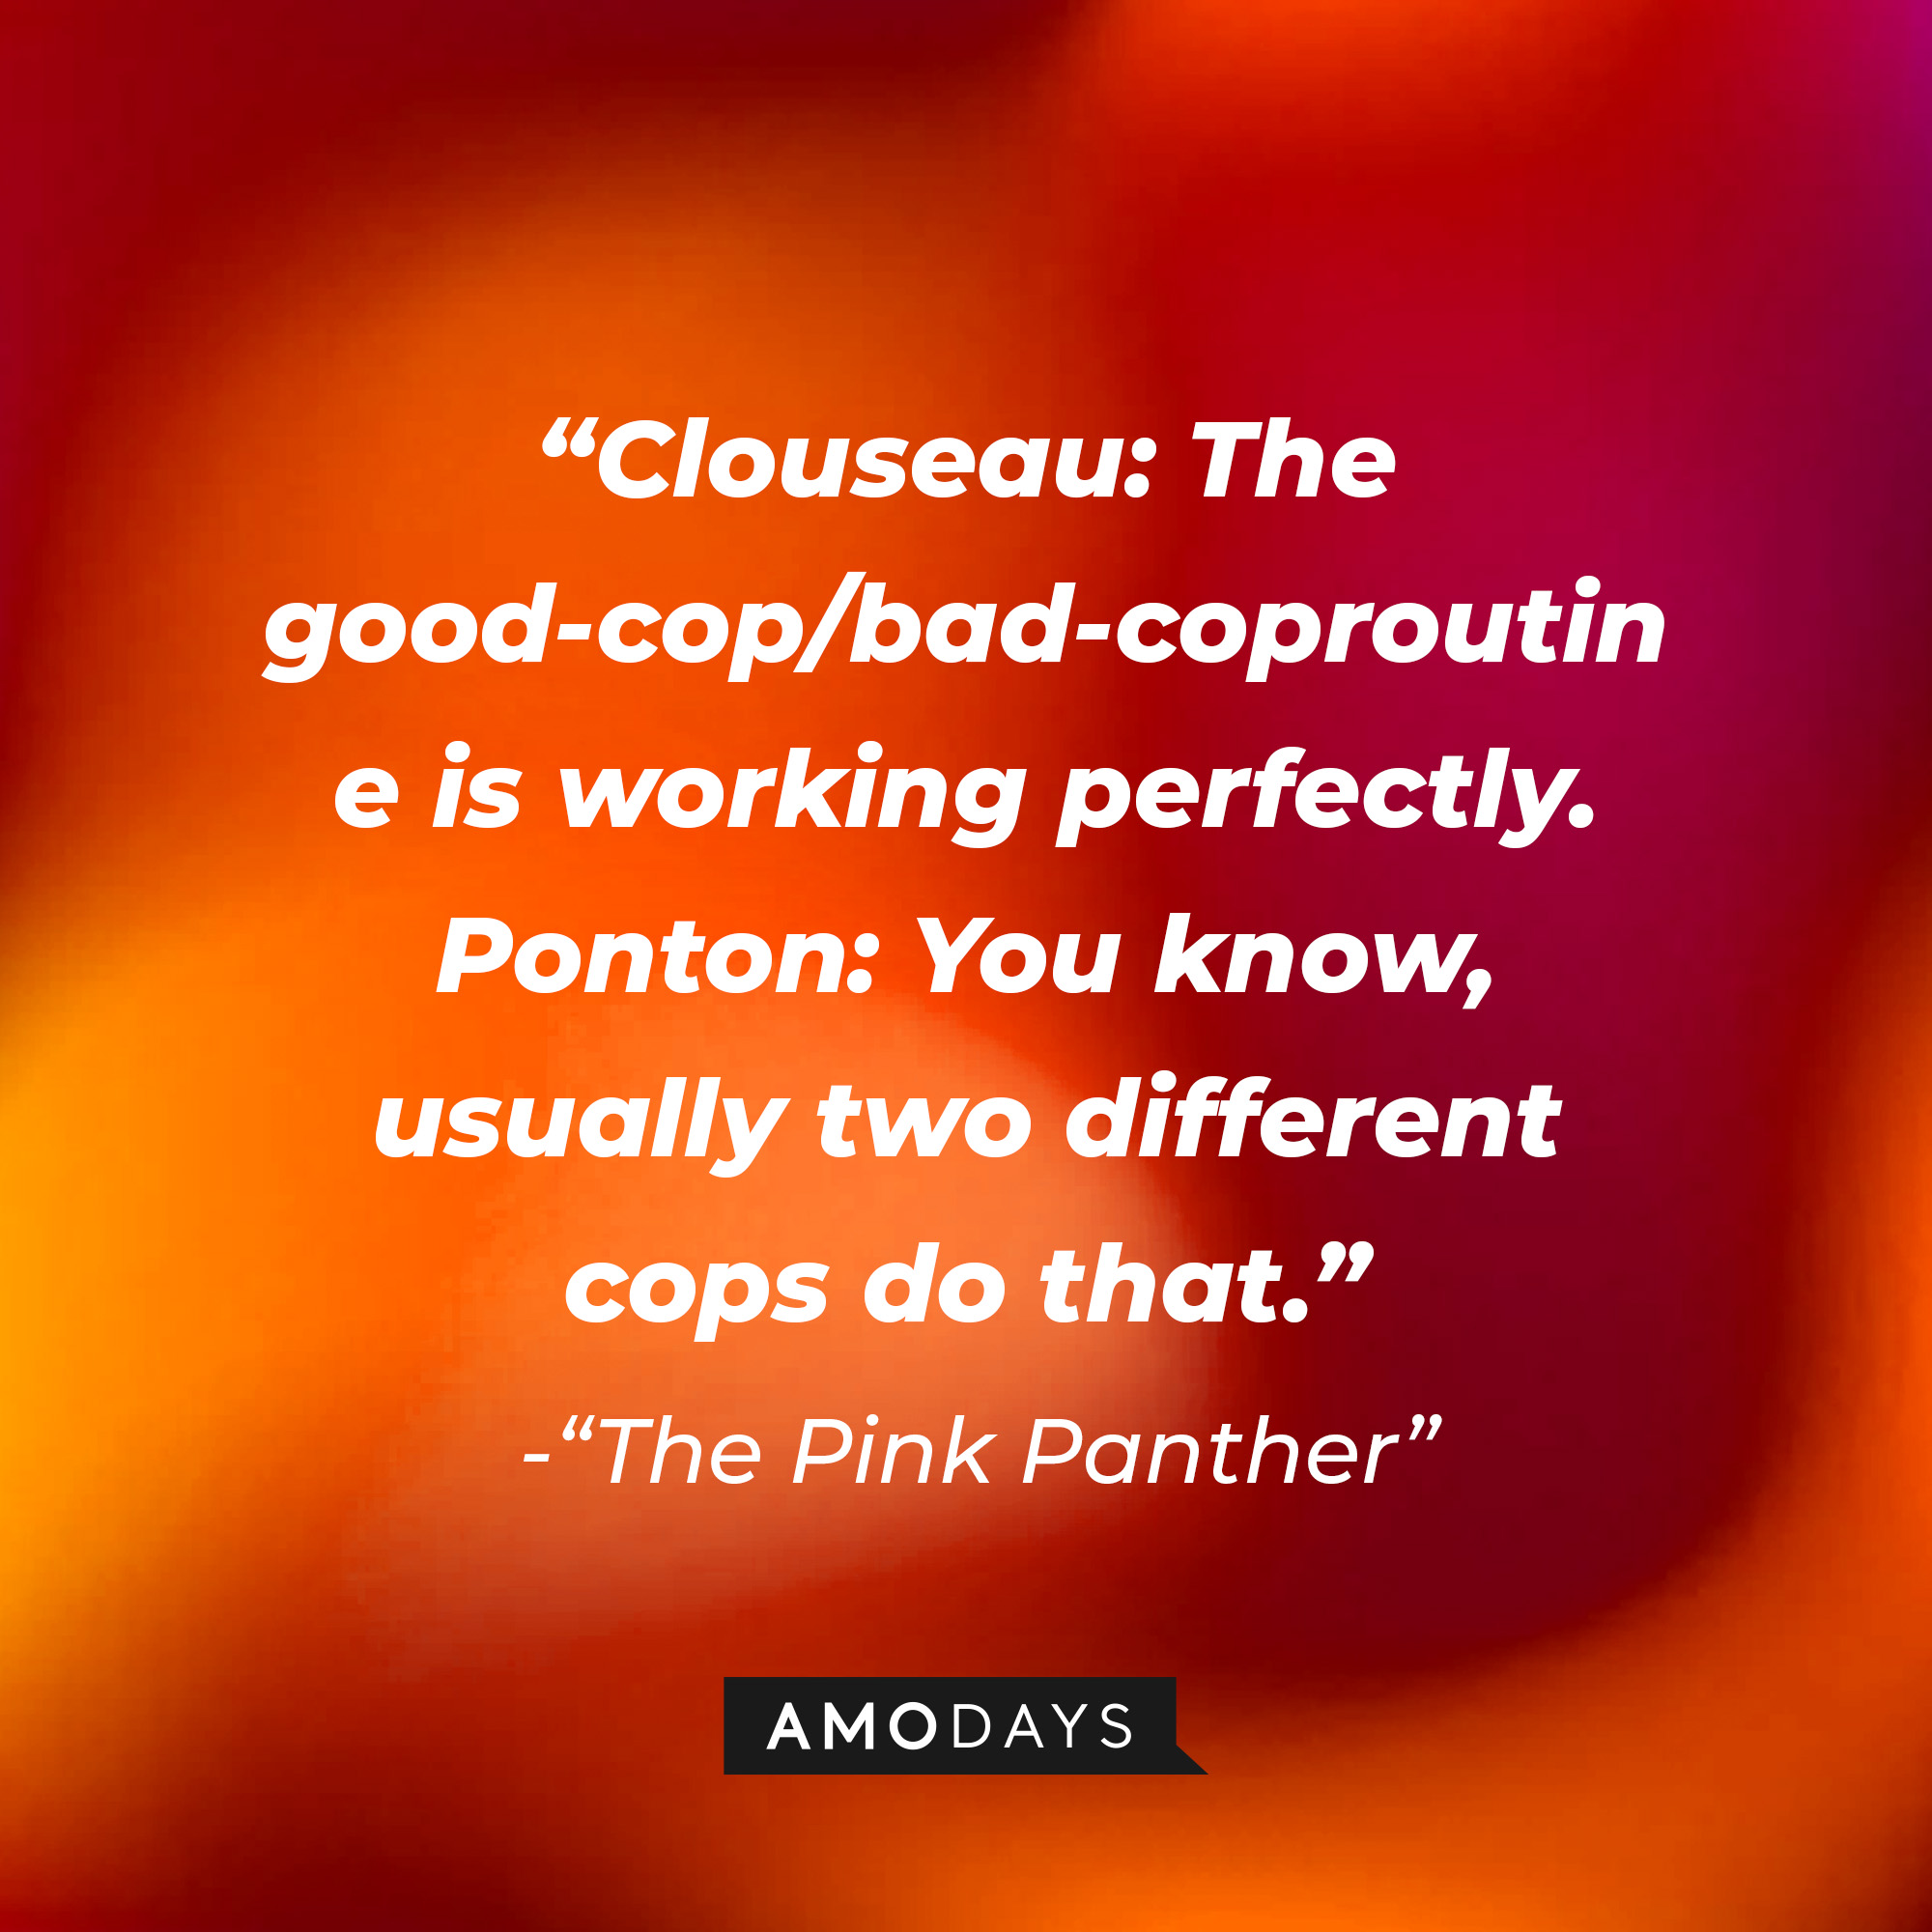 Inspector Jacques Clouseau's quote: "Clouseau: The good-cop/bad-coproutine is working perfectly. ; Ponton: You know, usually two different cops do that.” | Source: Youtube.com/sonypictures